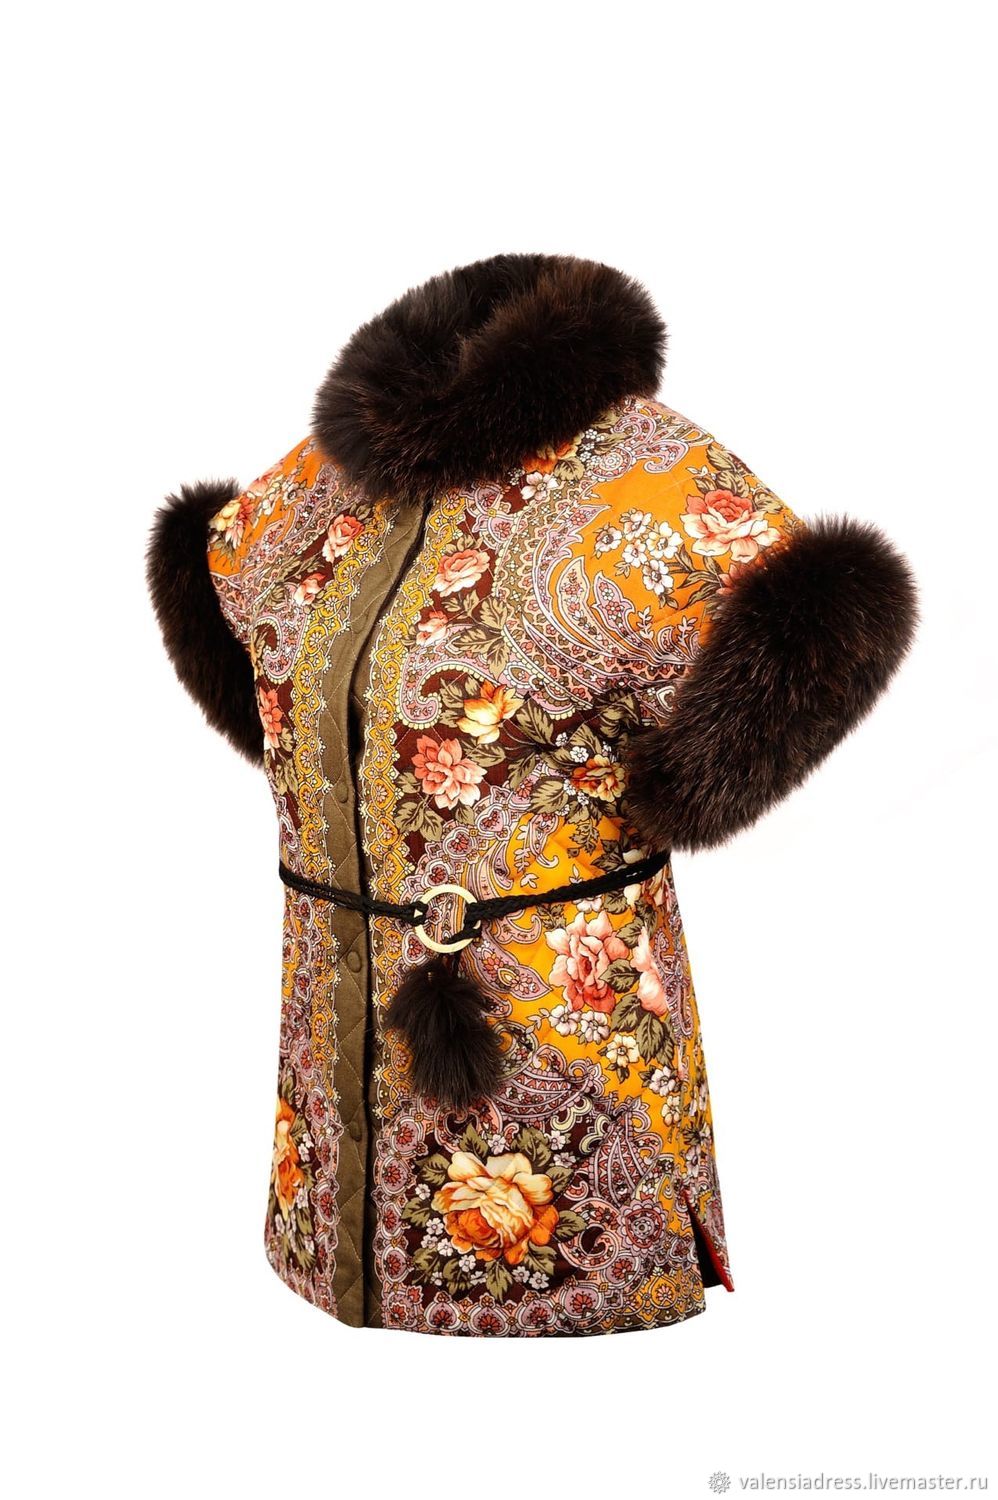 Insulated vest made of a scarf with fur, Vests, St. Petersburg,  Фото №1